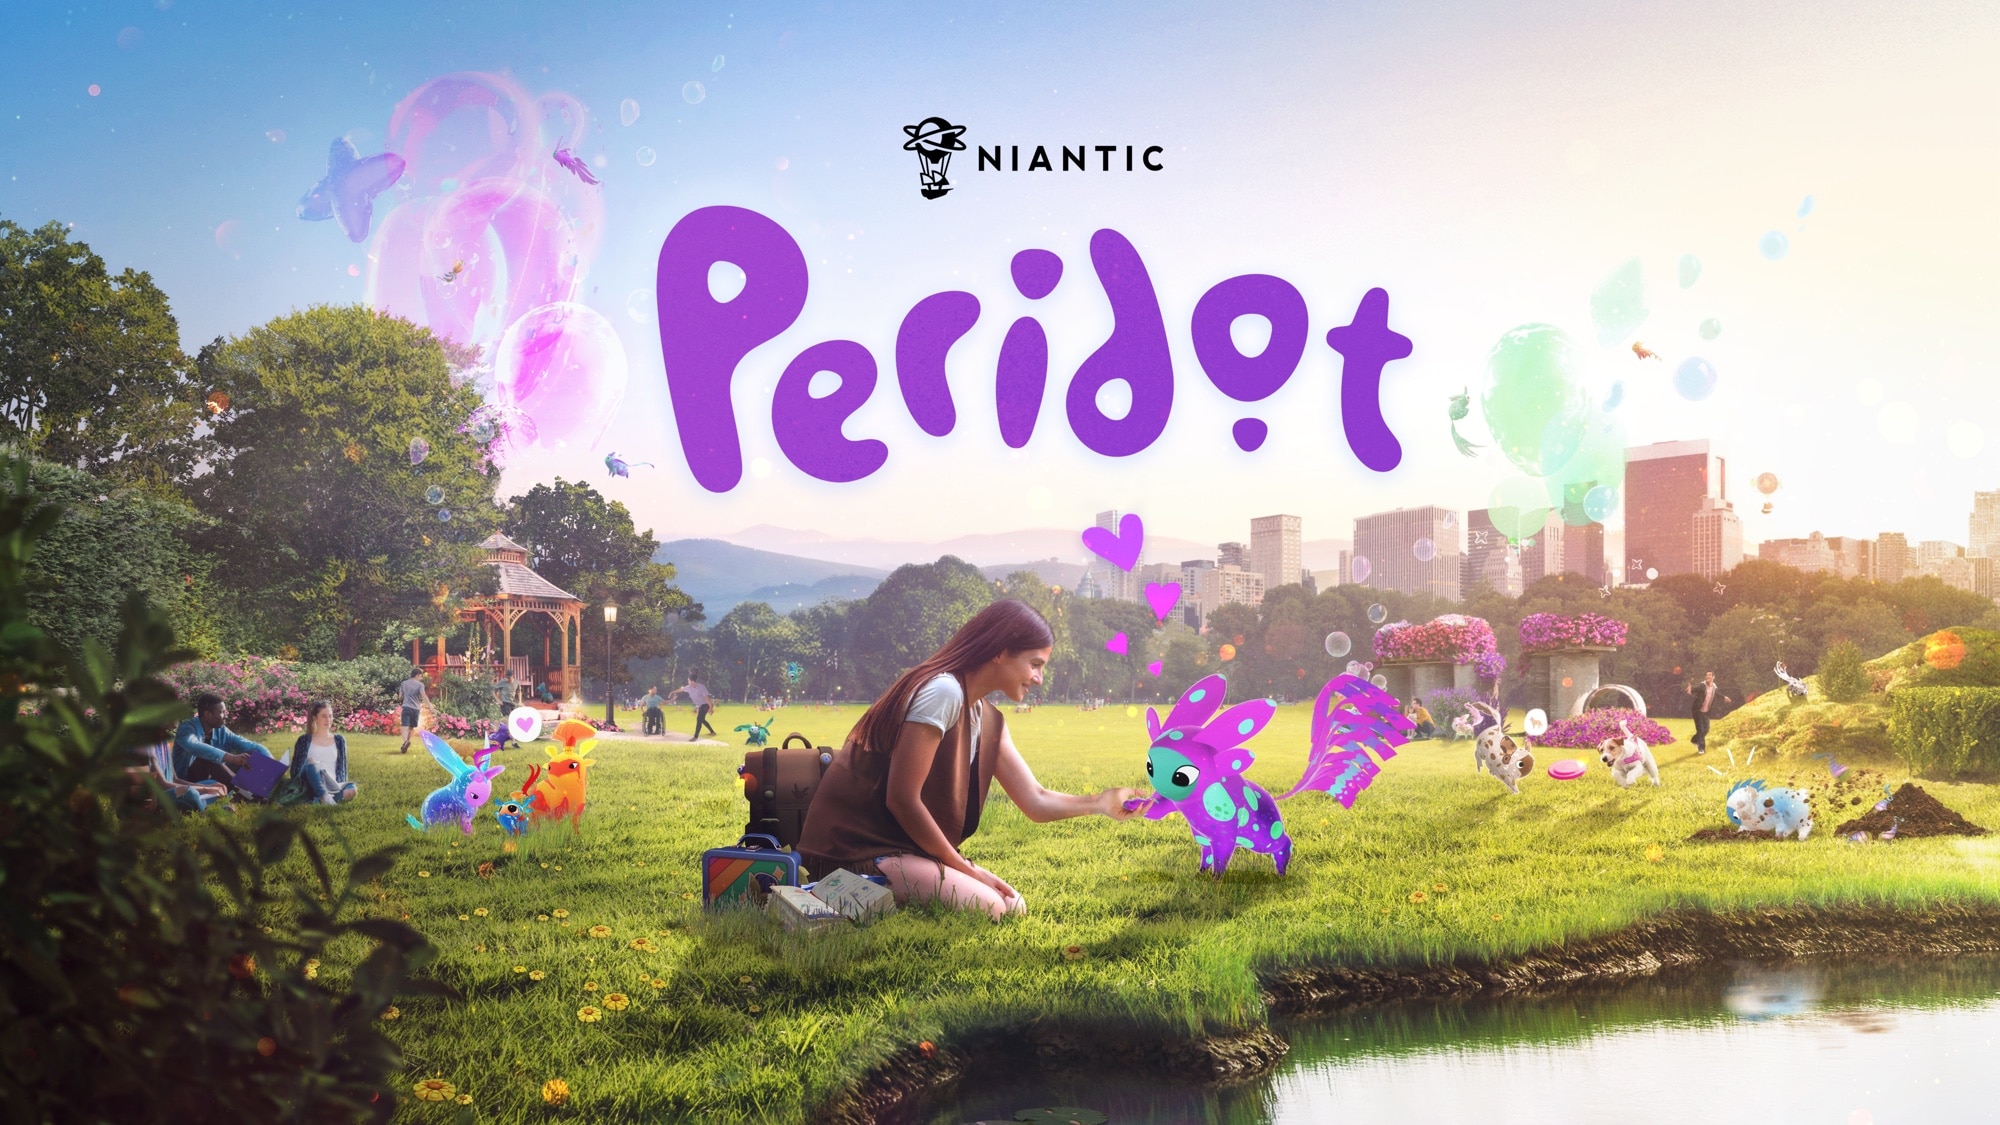 From the creator of Pokémon GO, Peridot launches in the App Store